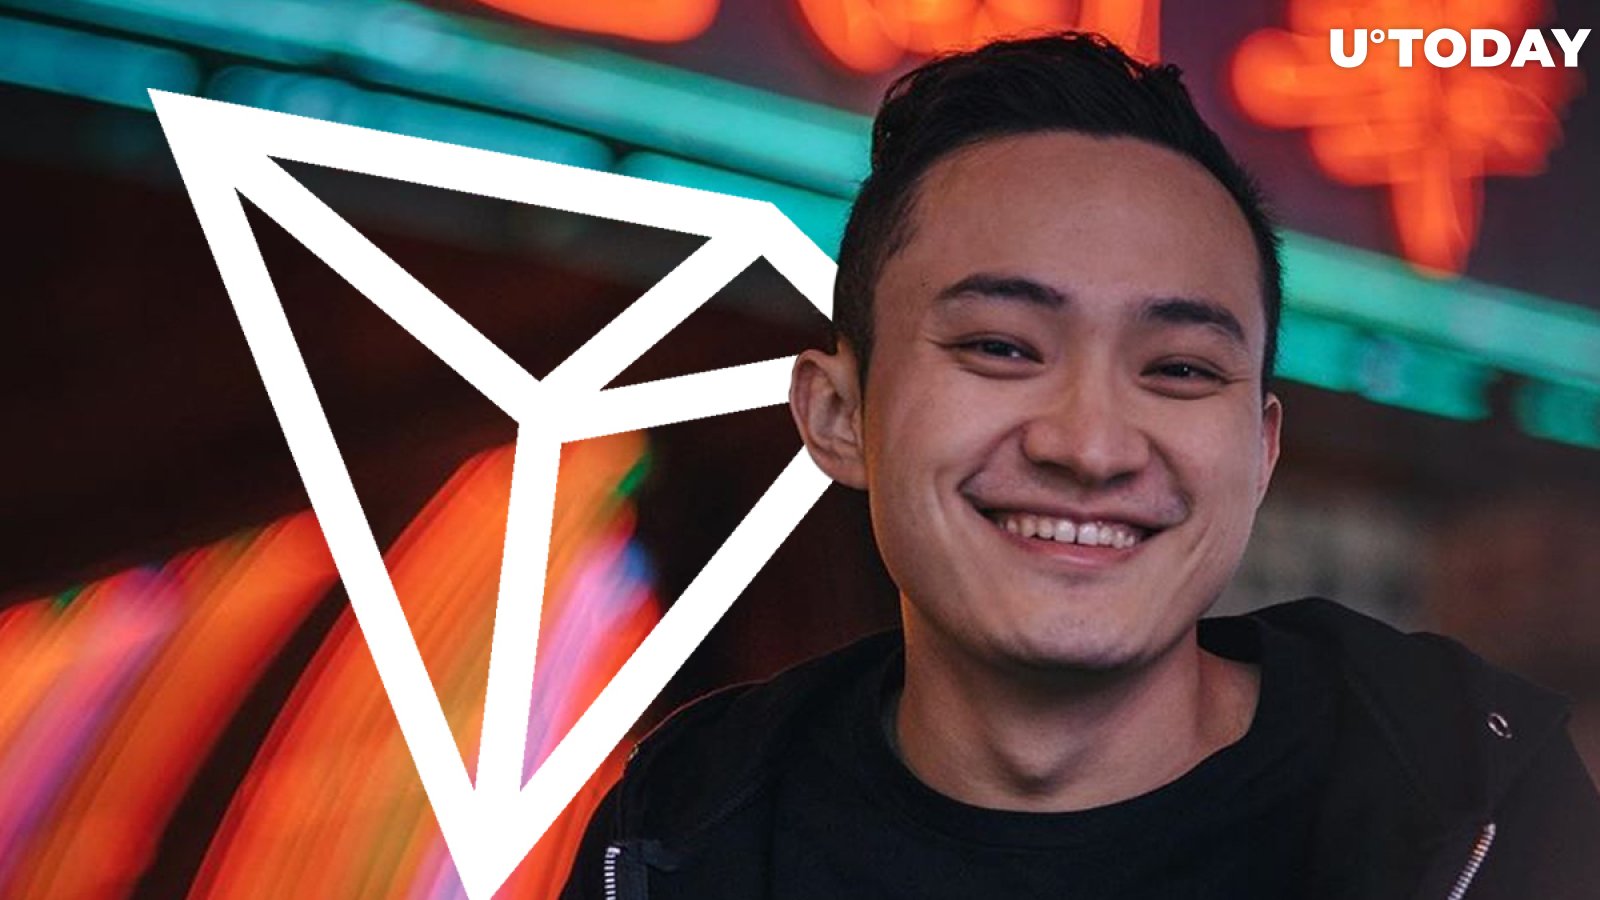 Tron Goes All In on DeFi as Justin Sun Plans JUSTSwap to Challenge Ethereum-Based DeFi in Future